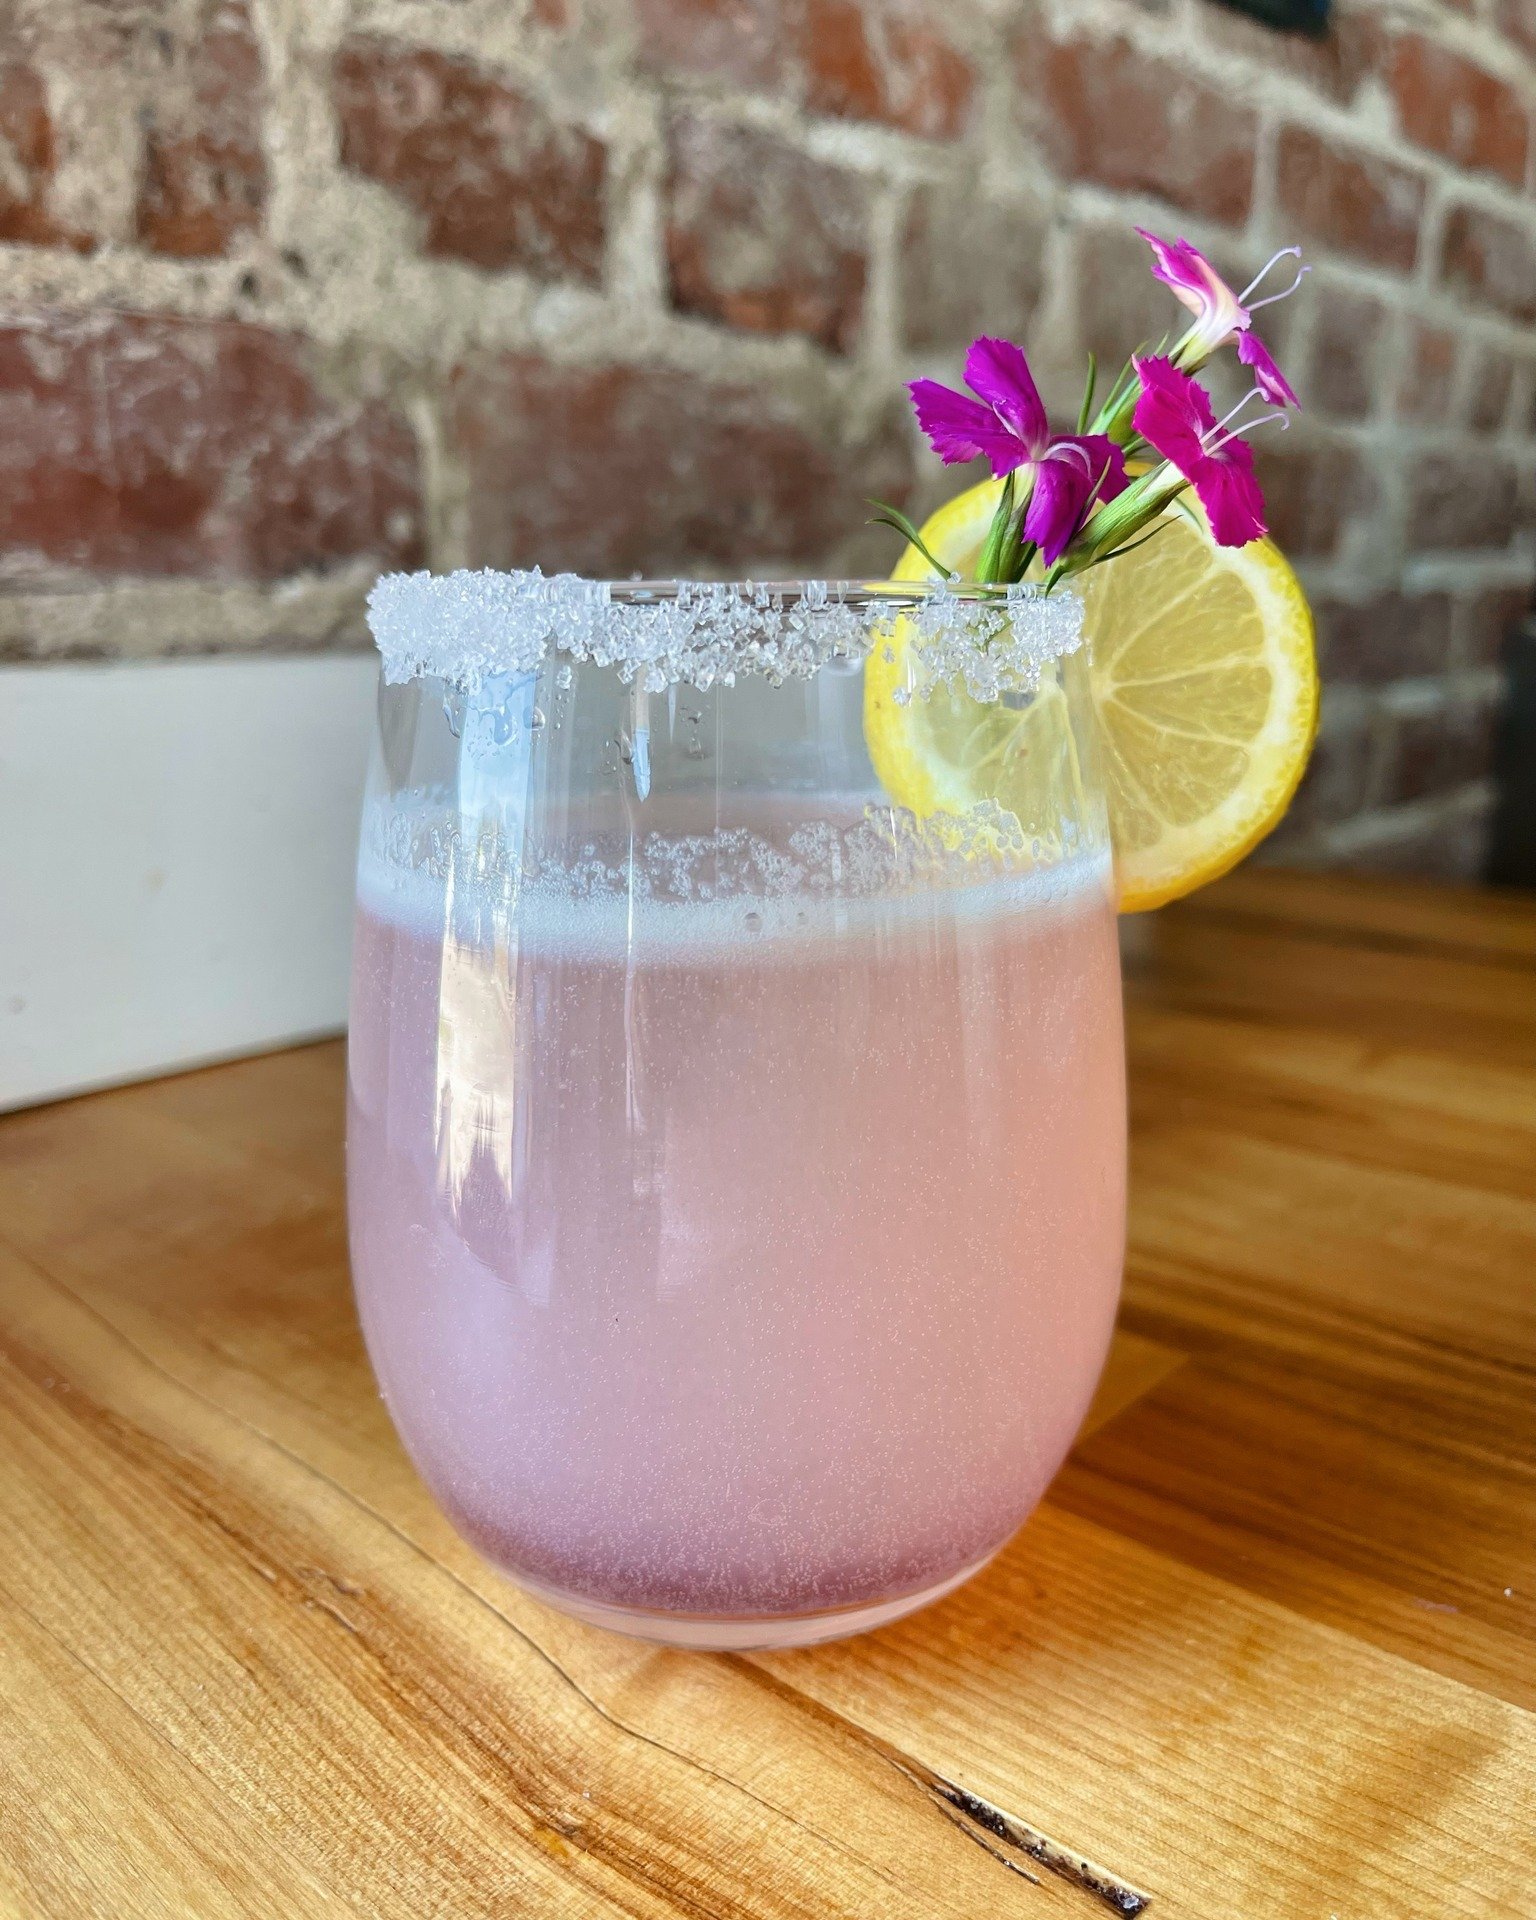 We are SPRINGing new mimosas on you starting today! They are pretty and so so yummy! 🍾✨

Lemon Lavender Mimosa: Lavender Syrup, Prosecco &amp; lemonade🍋
Fros&eacute;: Ros&eacute;, Strawberries, Sugar. (Available for takeout)🍓
Brunch Punch: Raspber